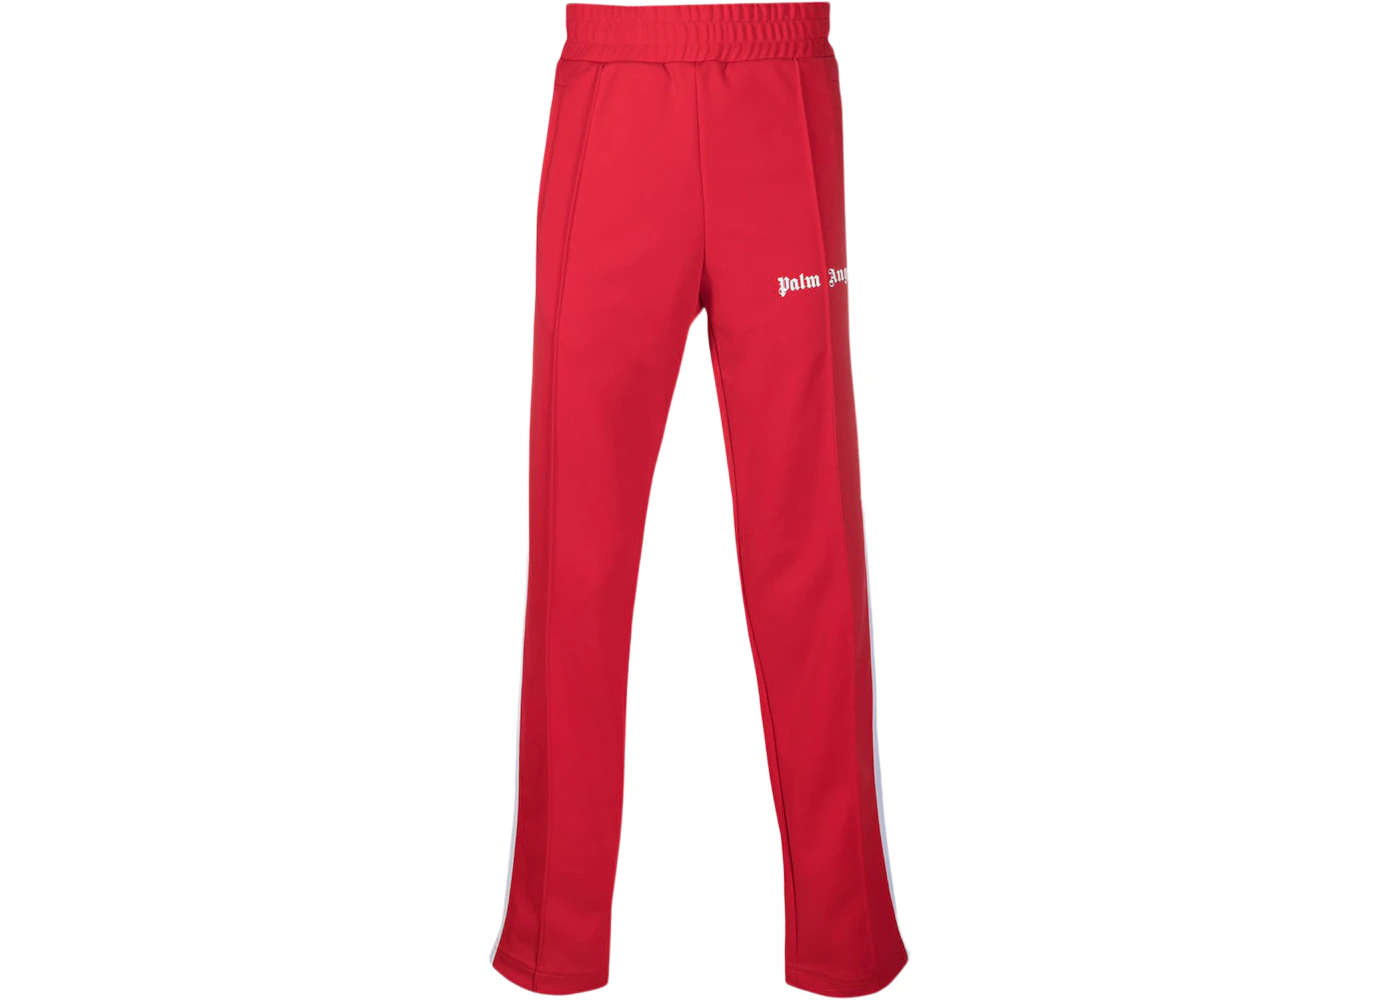 Palm Angels Side Stripe Track Pants Red/White Men's - SS21 - US